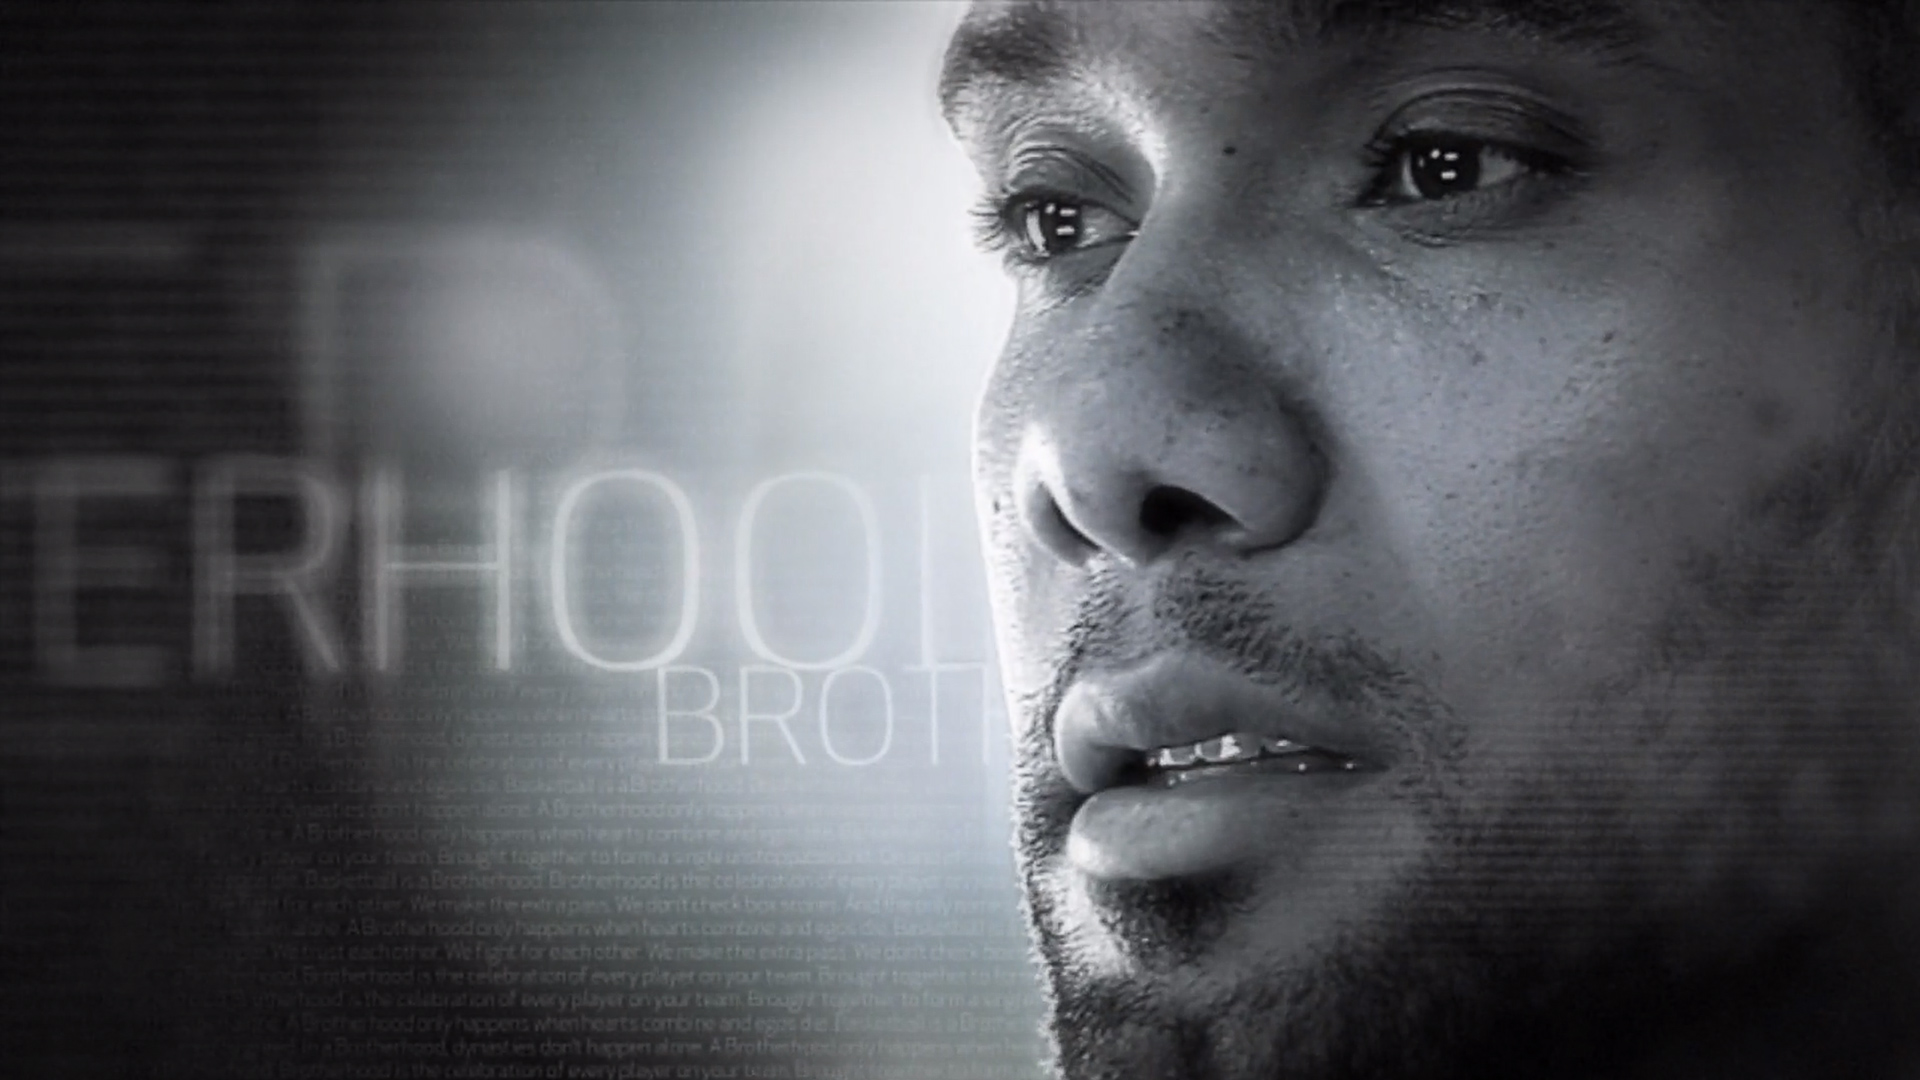 Screen grab from Adidas Brotherhood campaign video